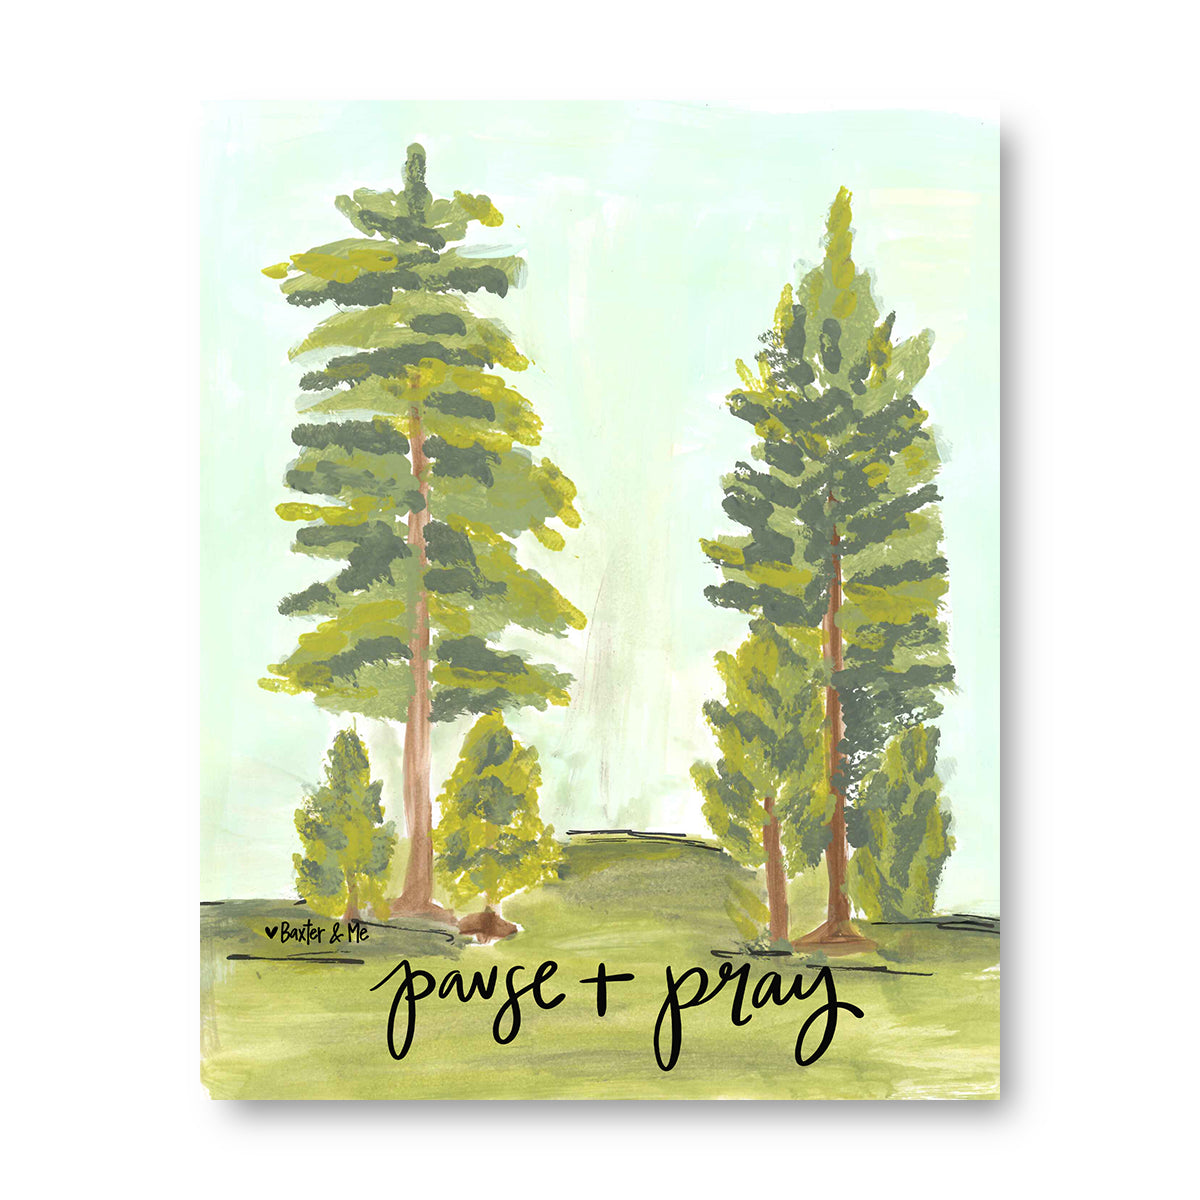 Pause + Pray - Wrapped Canvas, 8" x 10"